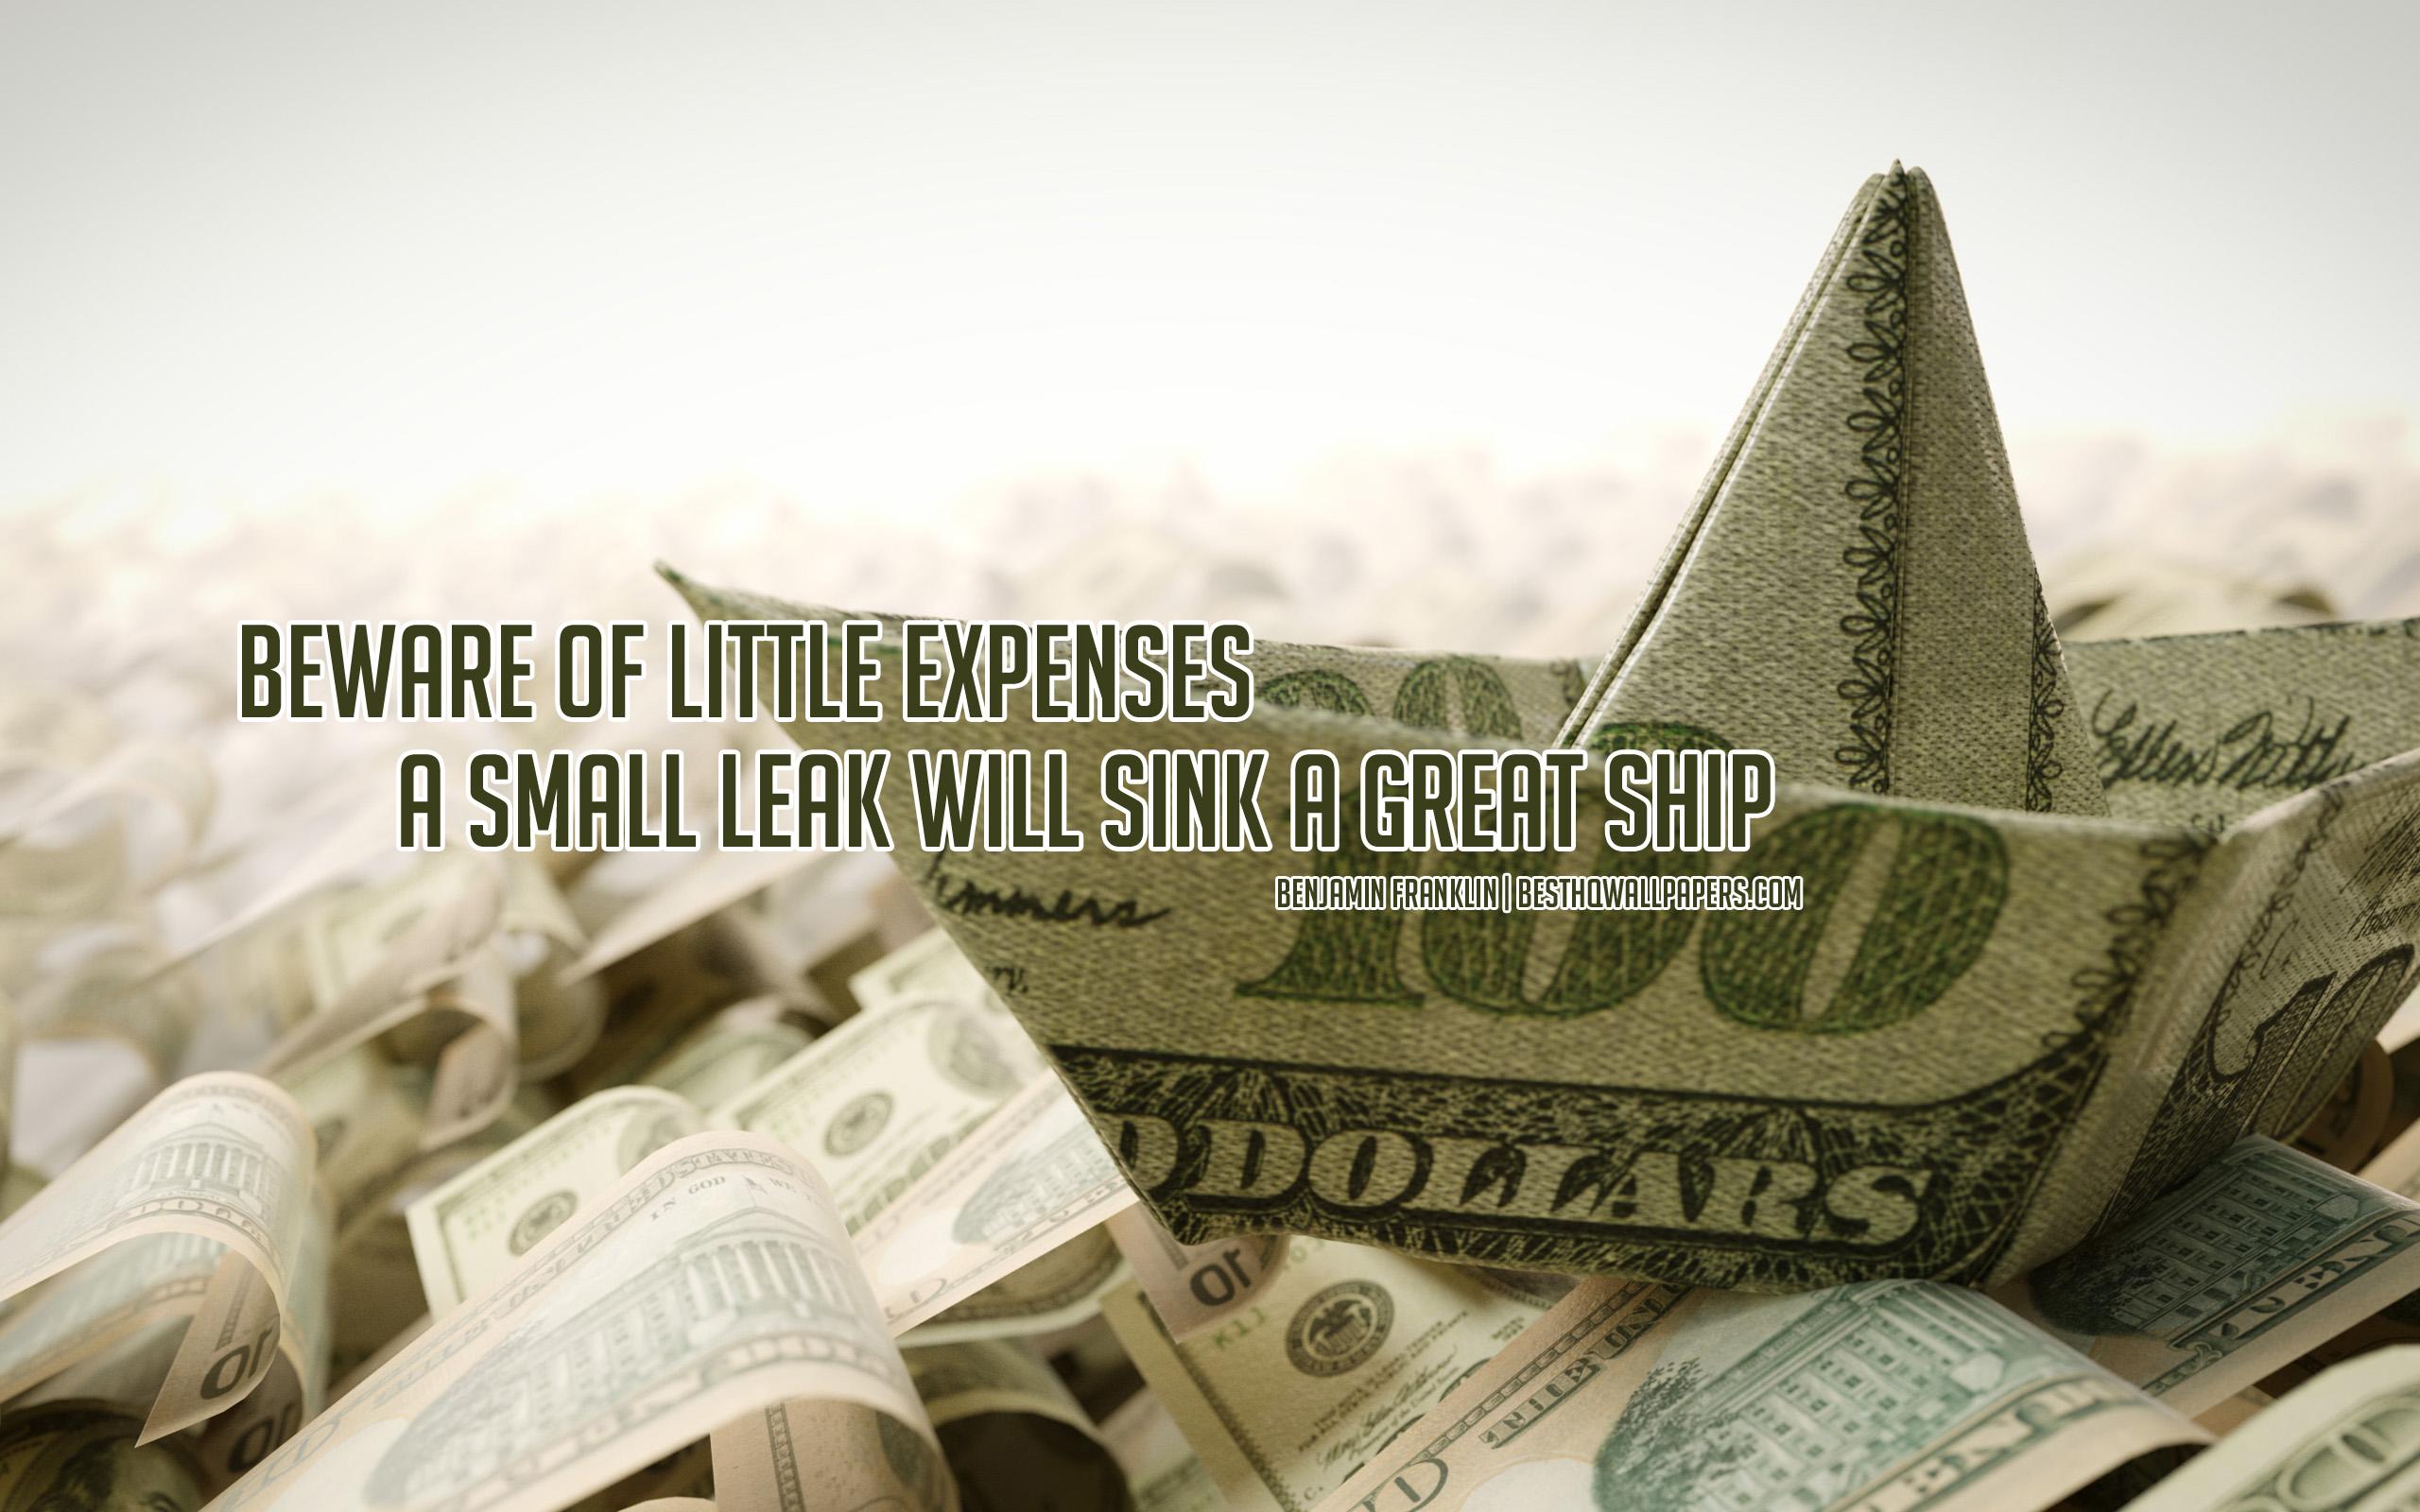 Download wallpaper Beware of little expenses a small leak